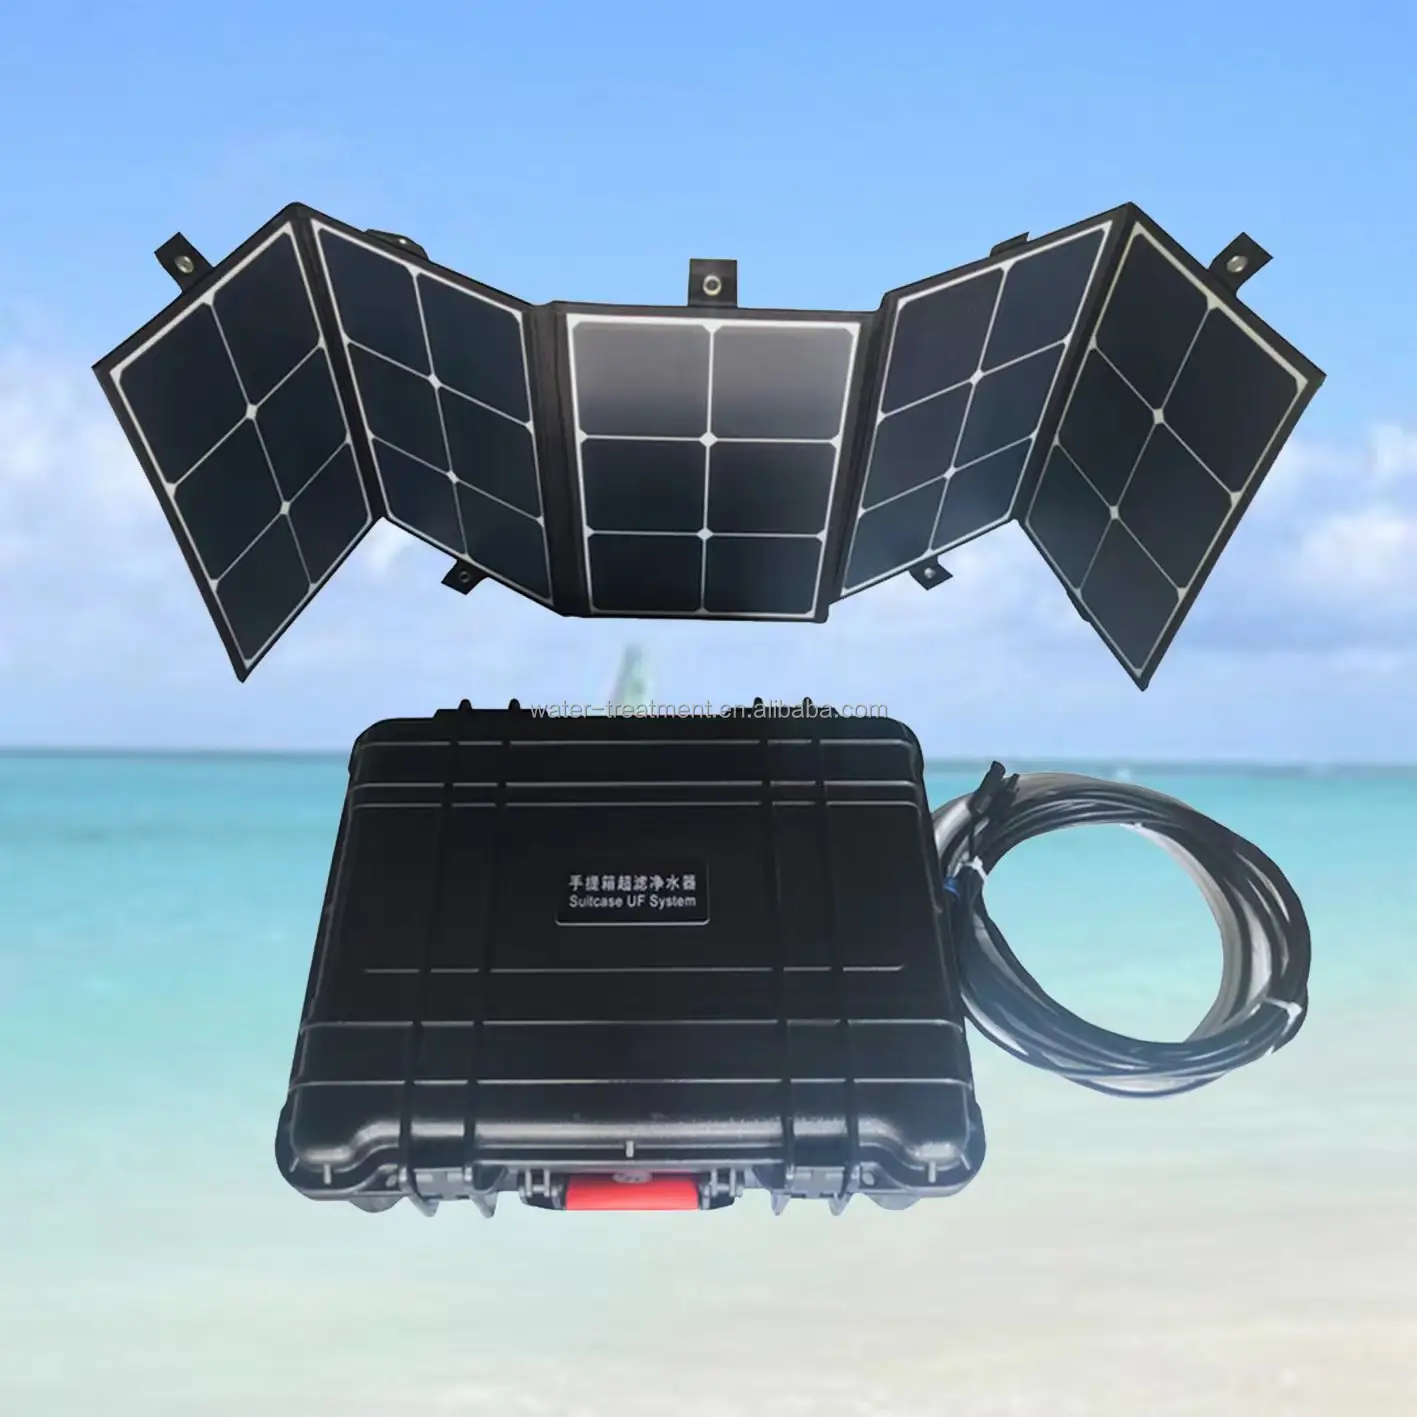 Solar Water Maker Portable Suitcase Solar Desalination System Salt Water To Drinking Water Machine Outdoor Emergency Water Maker Plant Price